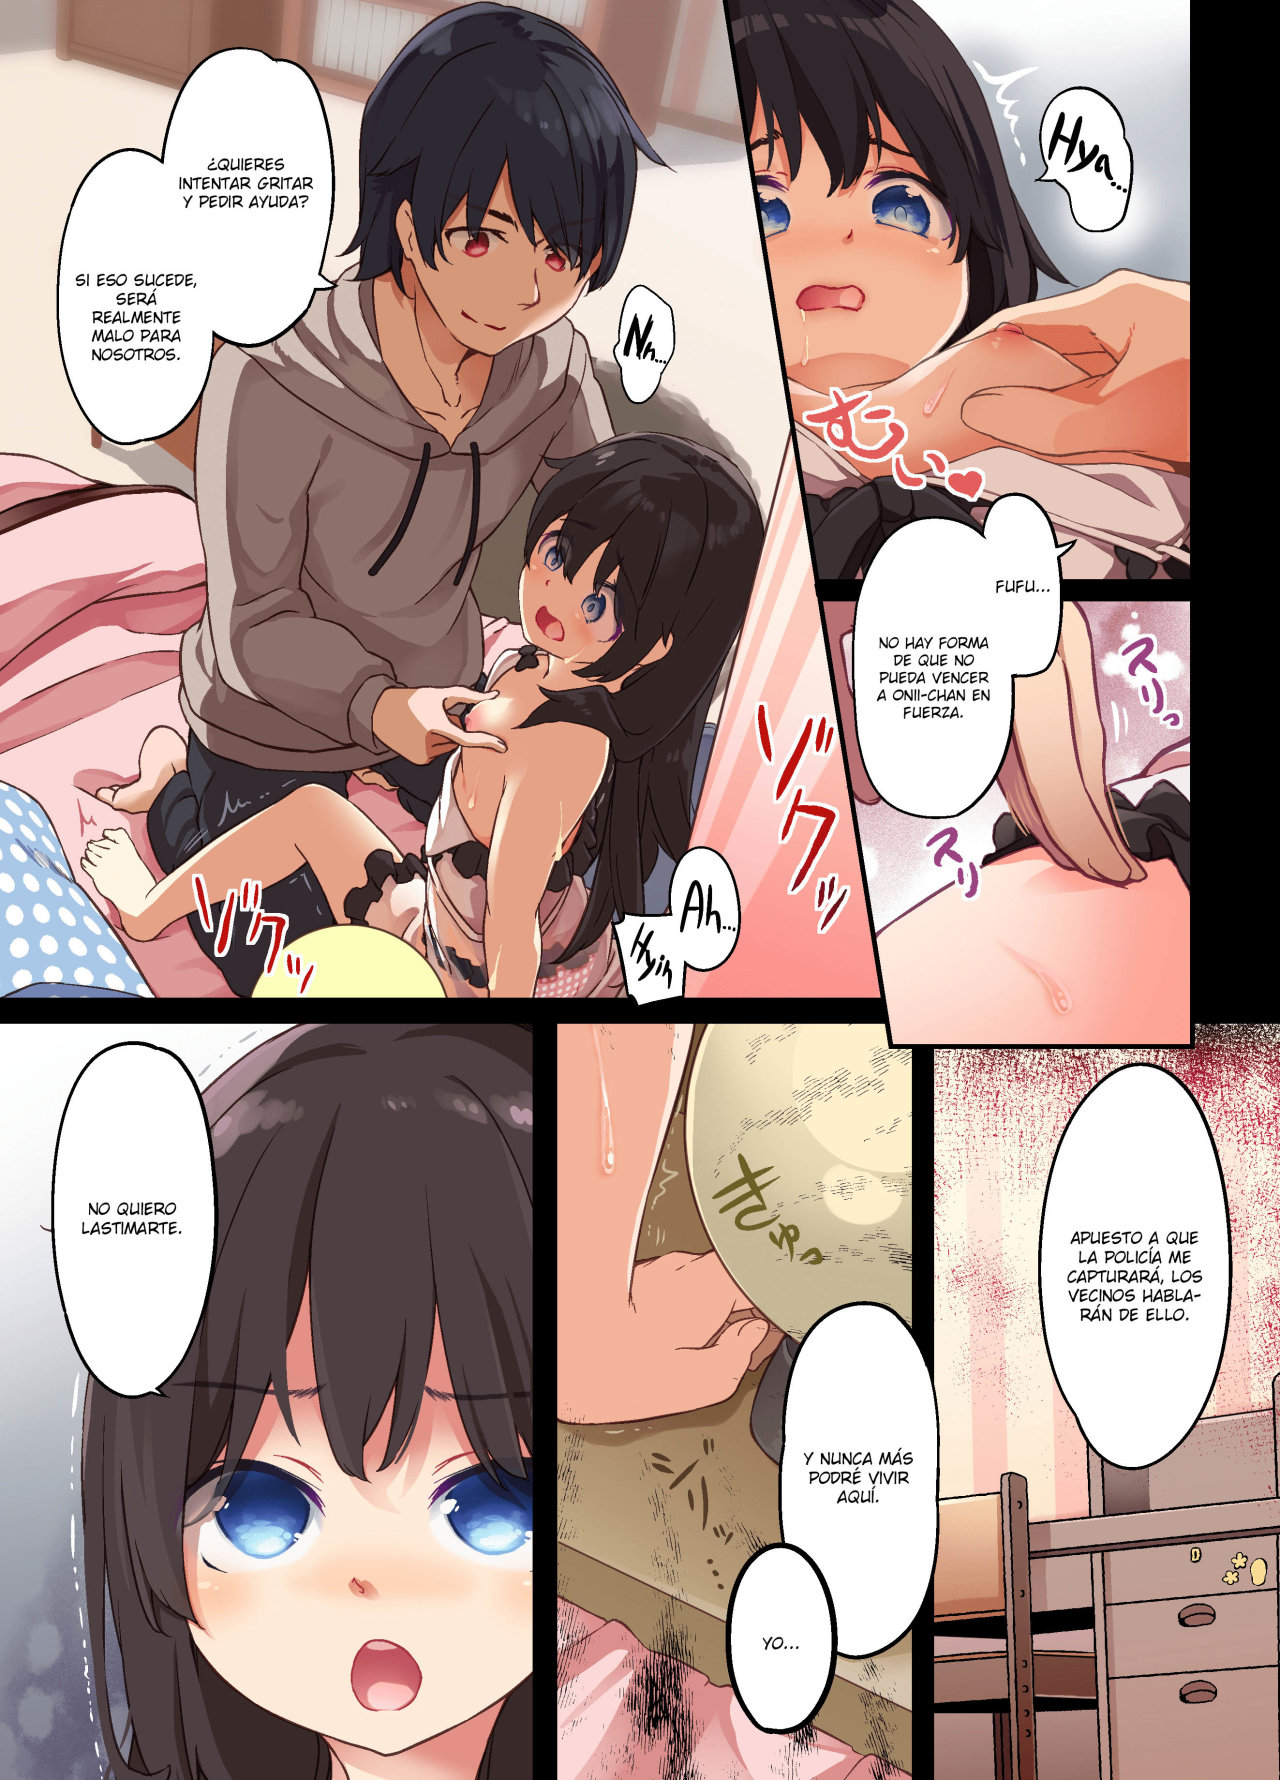 A Yandere Little Sister wants to be impregnated by her big brother - 15